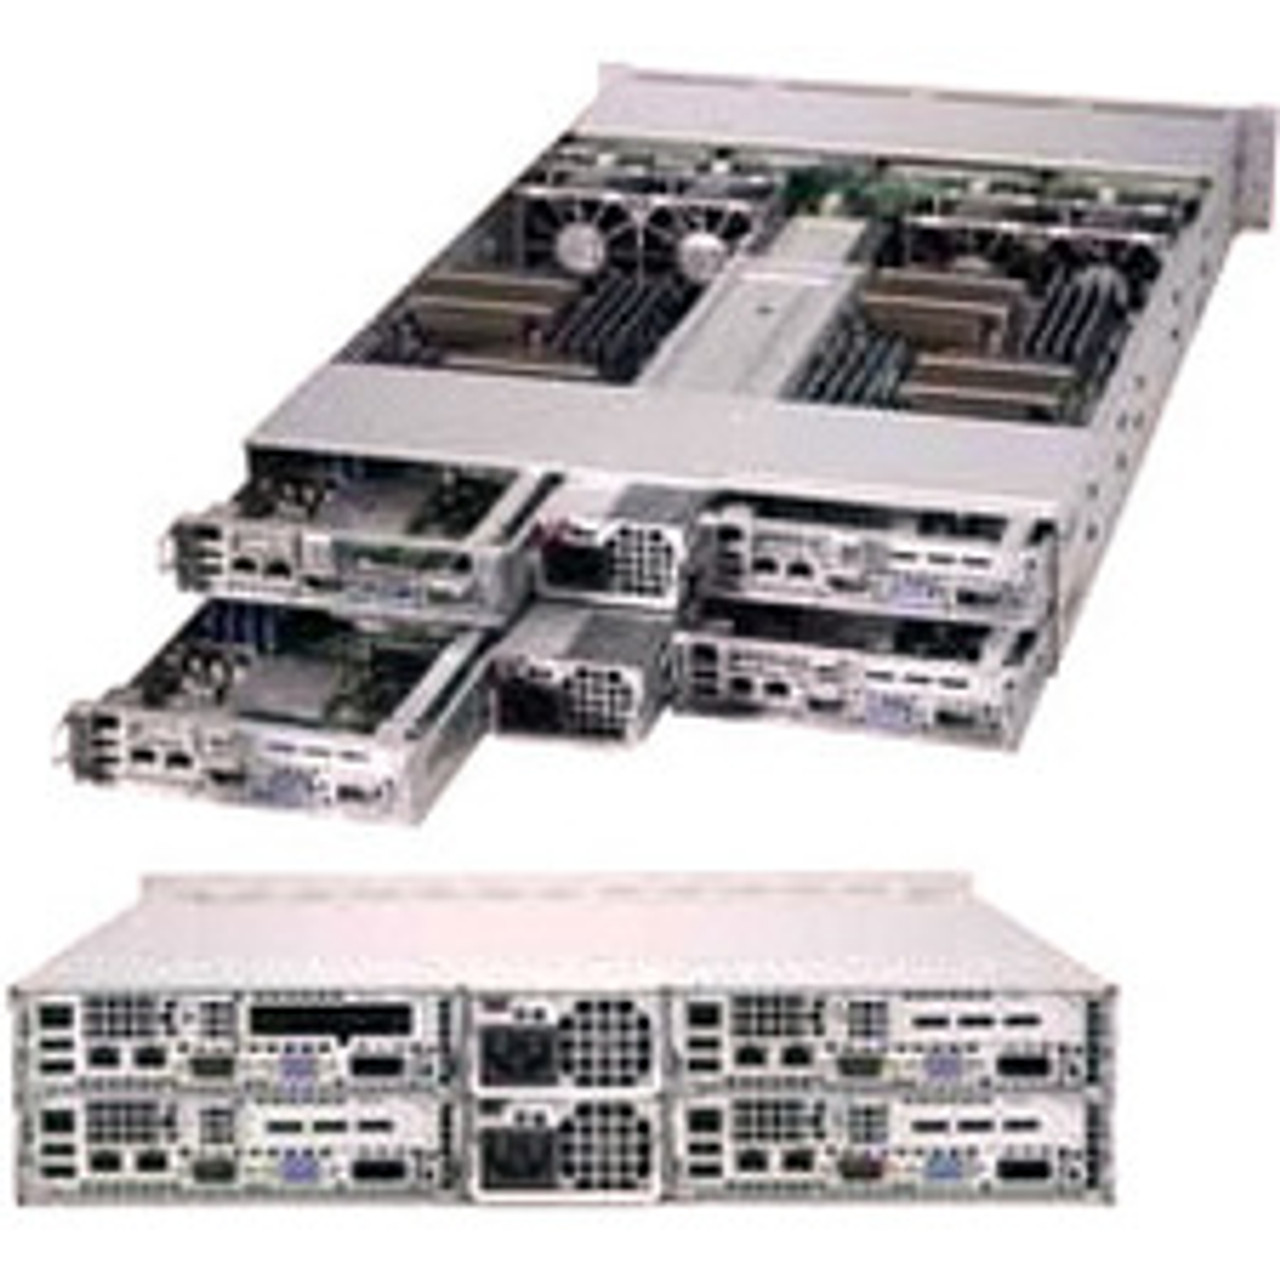 Supermicro AS-2022TG-HLTRF